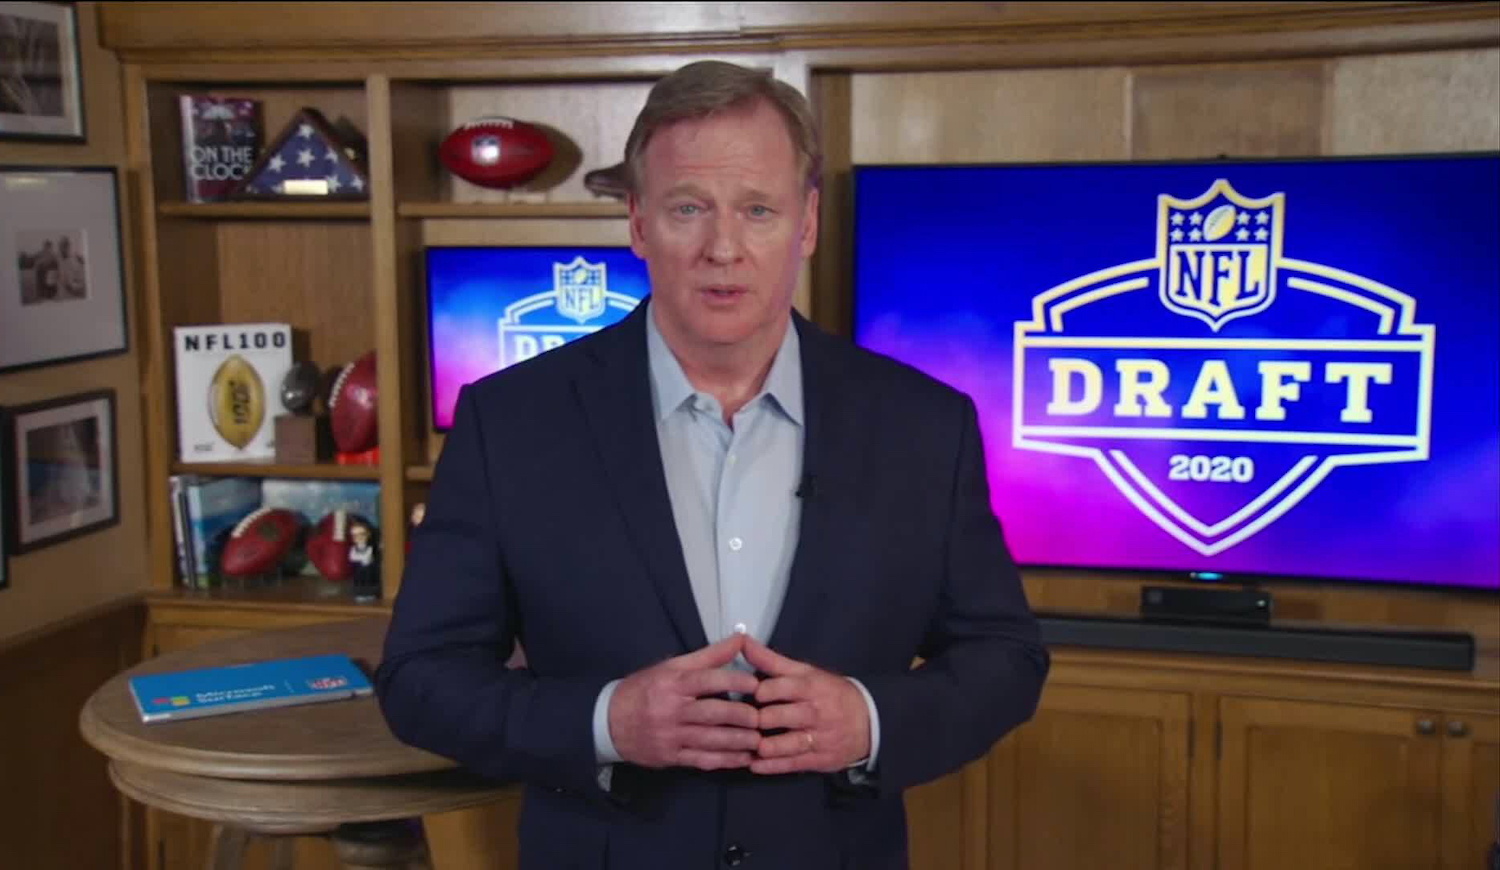 In this still image from video provided by the NFL, NFL Commissioner Roger Goodell during the NFL football draft Thursday, April 23, 2020. (NFL via AP)